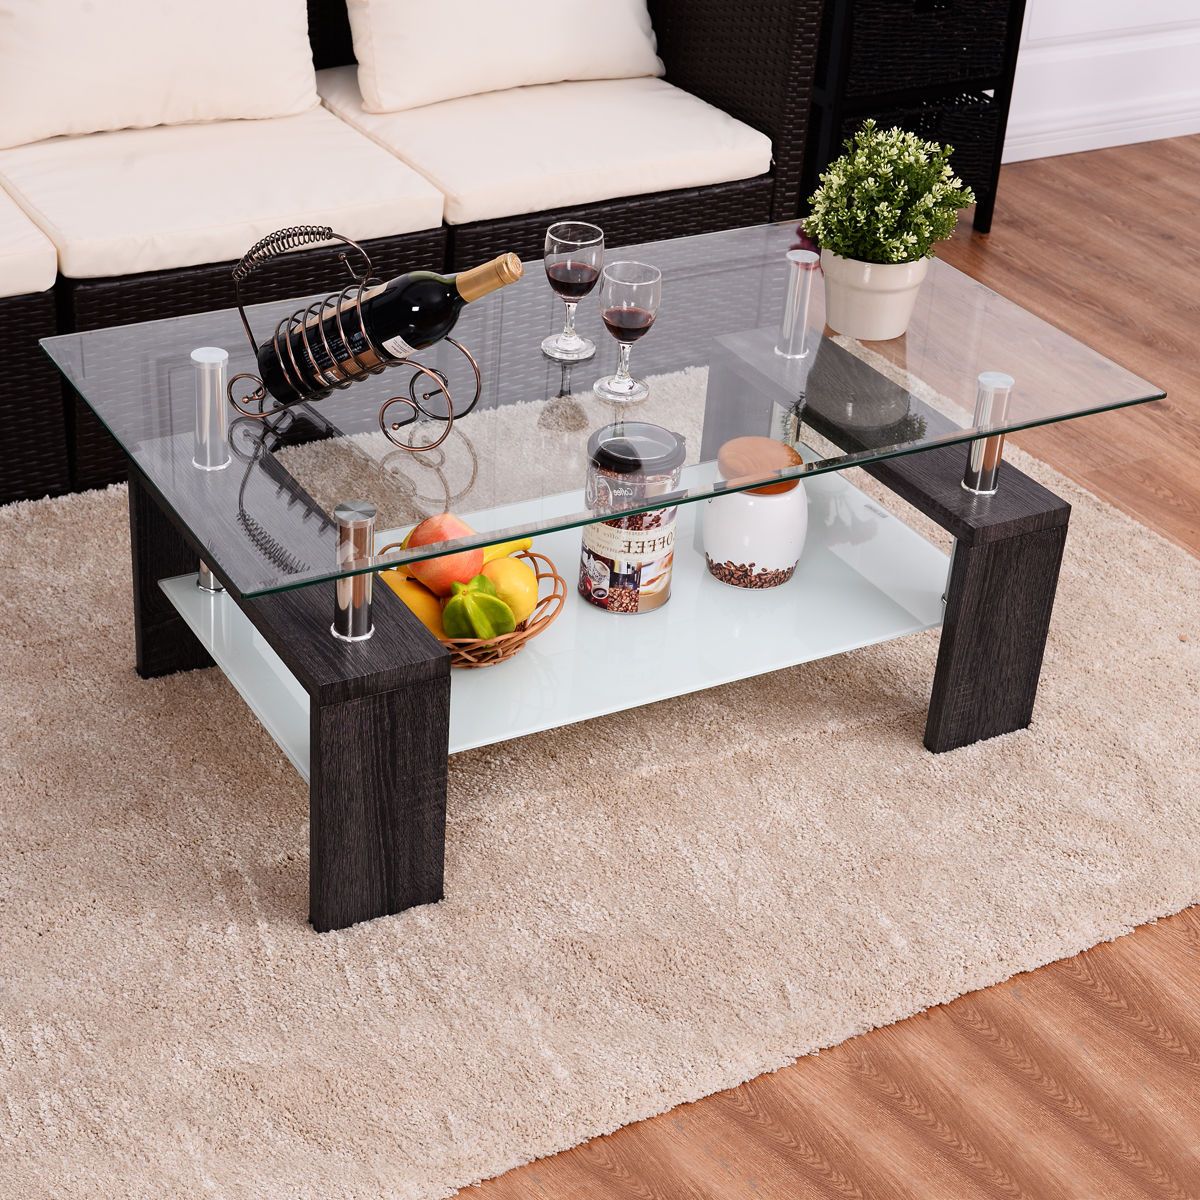 Giantex Rectangular Home Tempered Glass Coffee Table With Pertaining To Well Liked Rectangular Glass Top Coffee Tables (Gallery 3 of 20)